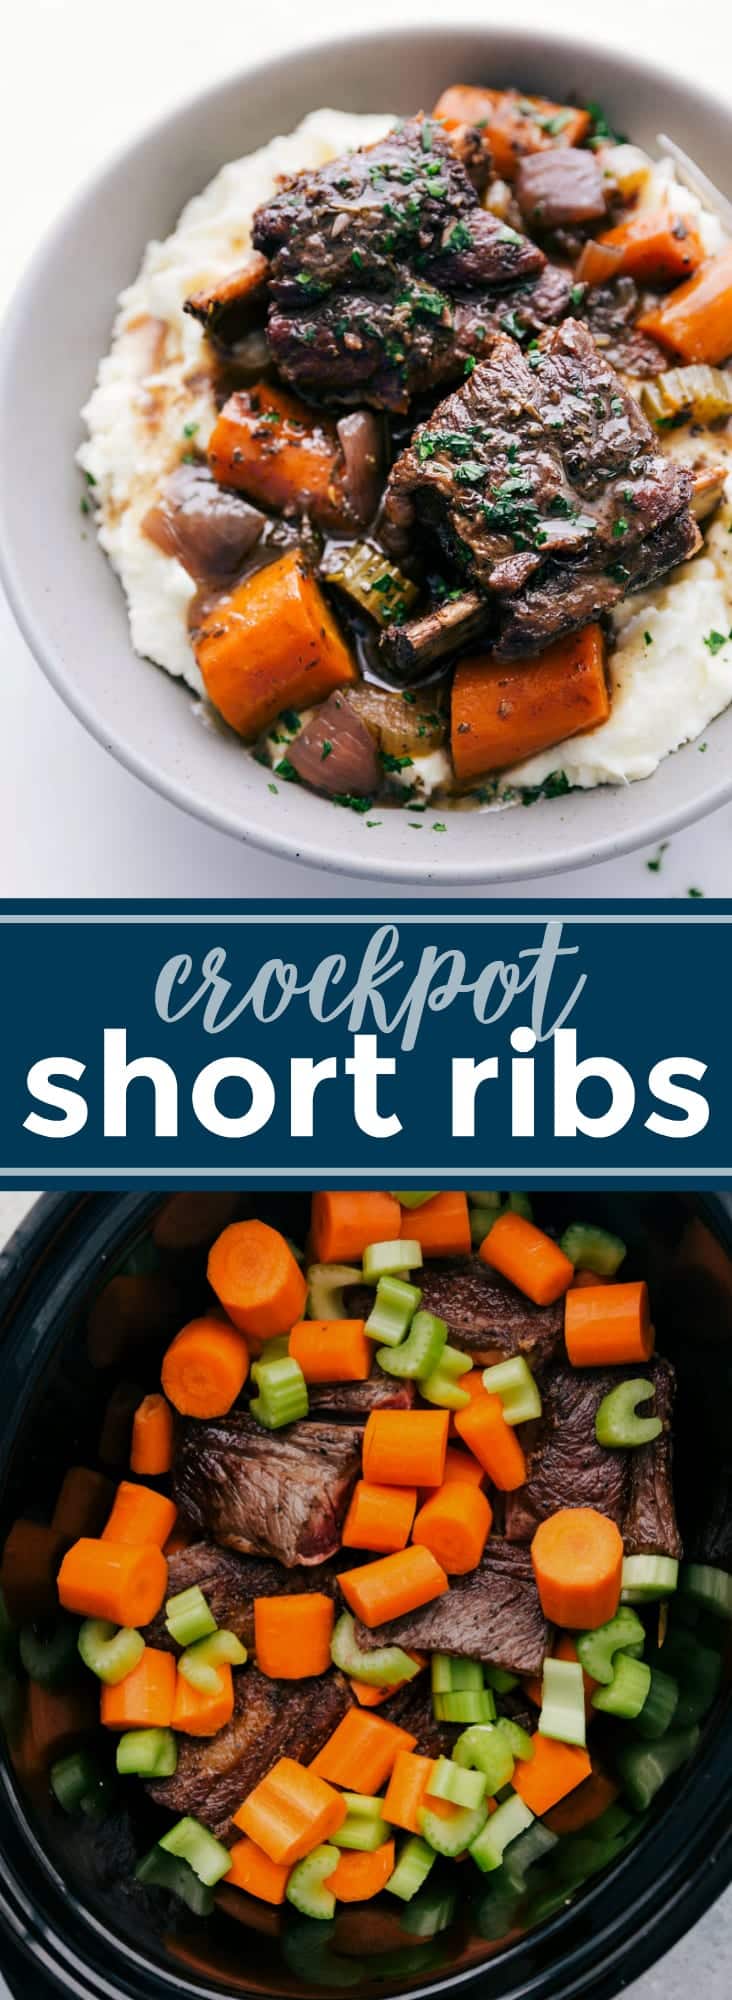 A savory, hearty meal of perfectly seasoned short ribs with veggies and a delicious gravy! Step-by-step photos and an EASY foolproof recipe! via chelseasmessyapron.com #crockpot #short #ribs #shortrib #dinner #easy #slow #cooker #familyfriendly #kidfriendly